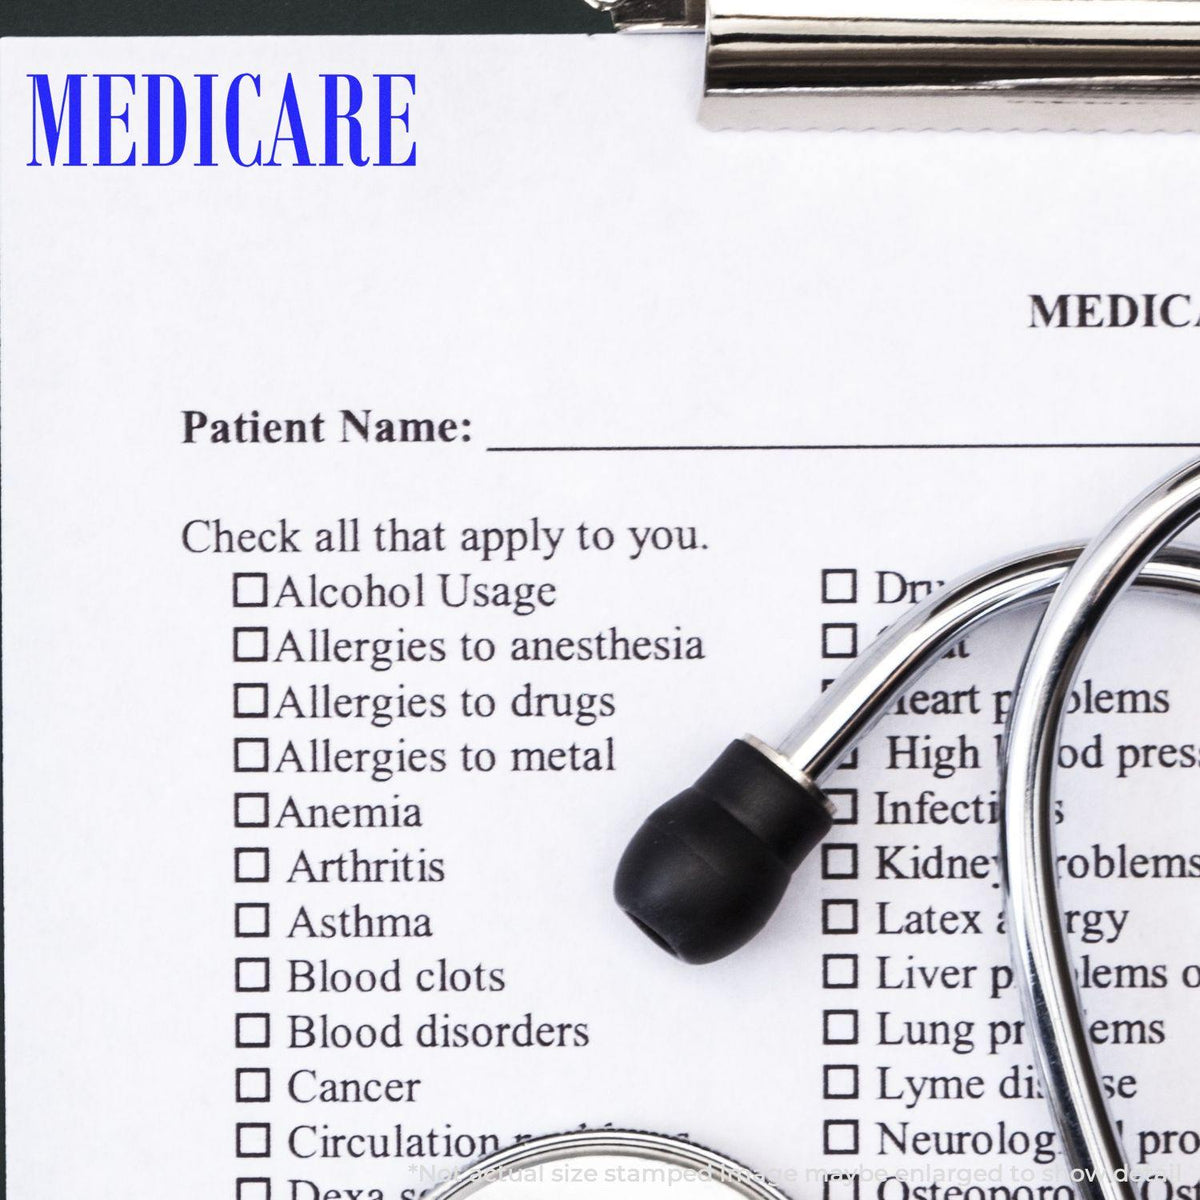 Large Medicare Rubber Stamp In Use Photo